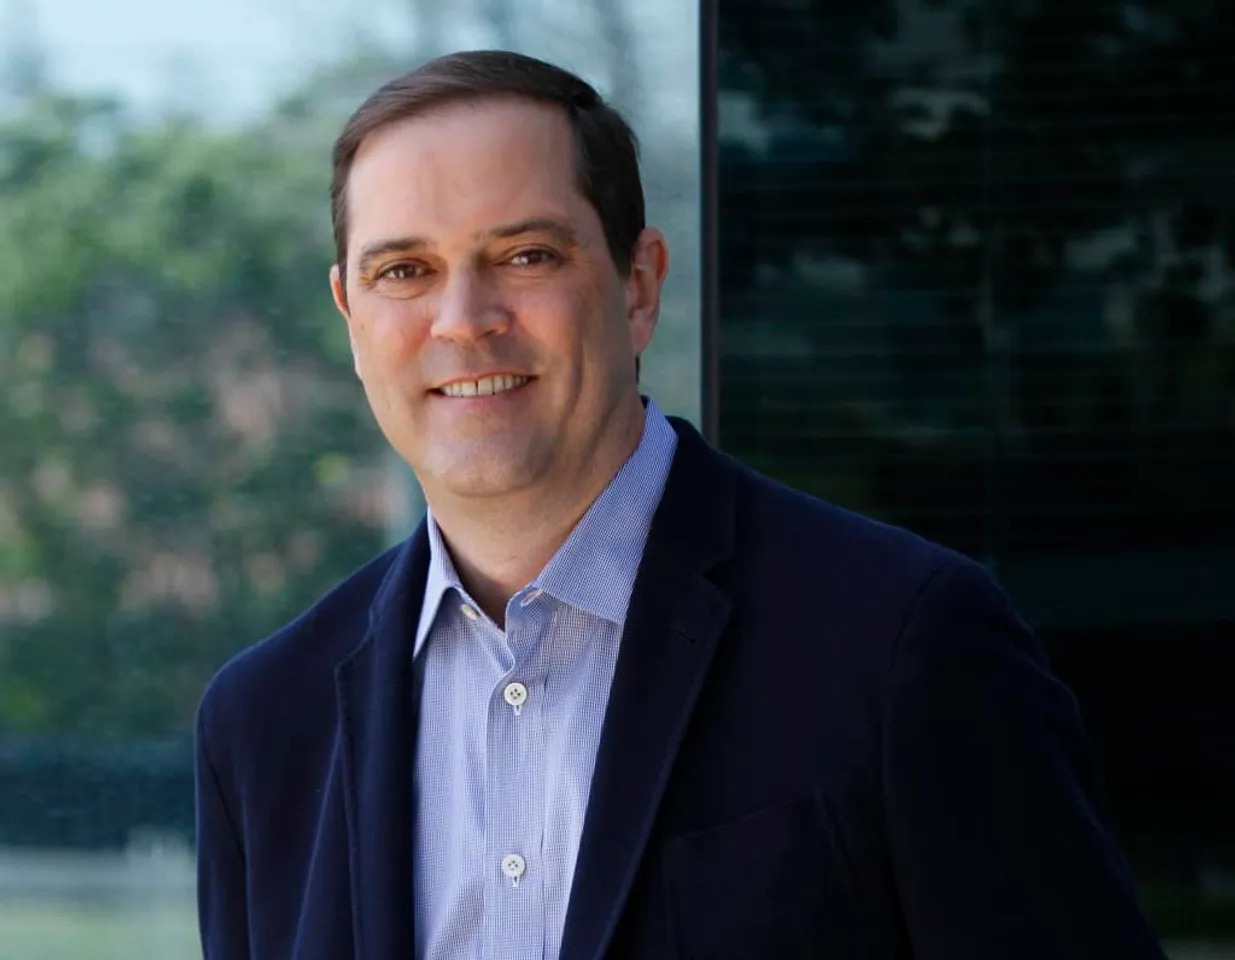 Cisco CEO Chuck Robbins appointed as new Chairman of US-Japan Business Council